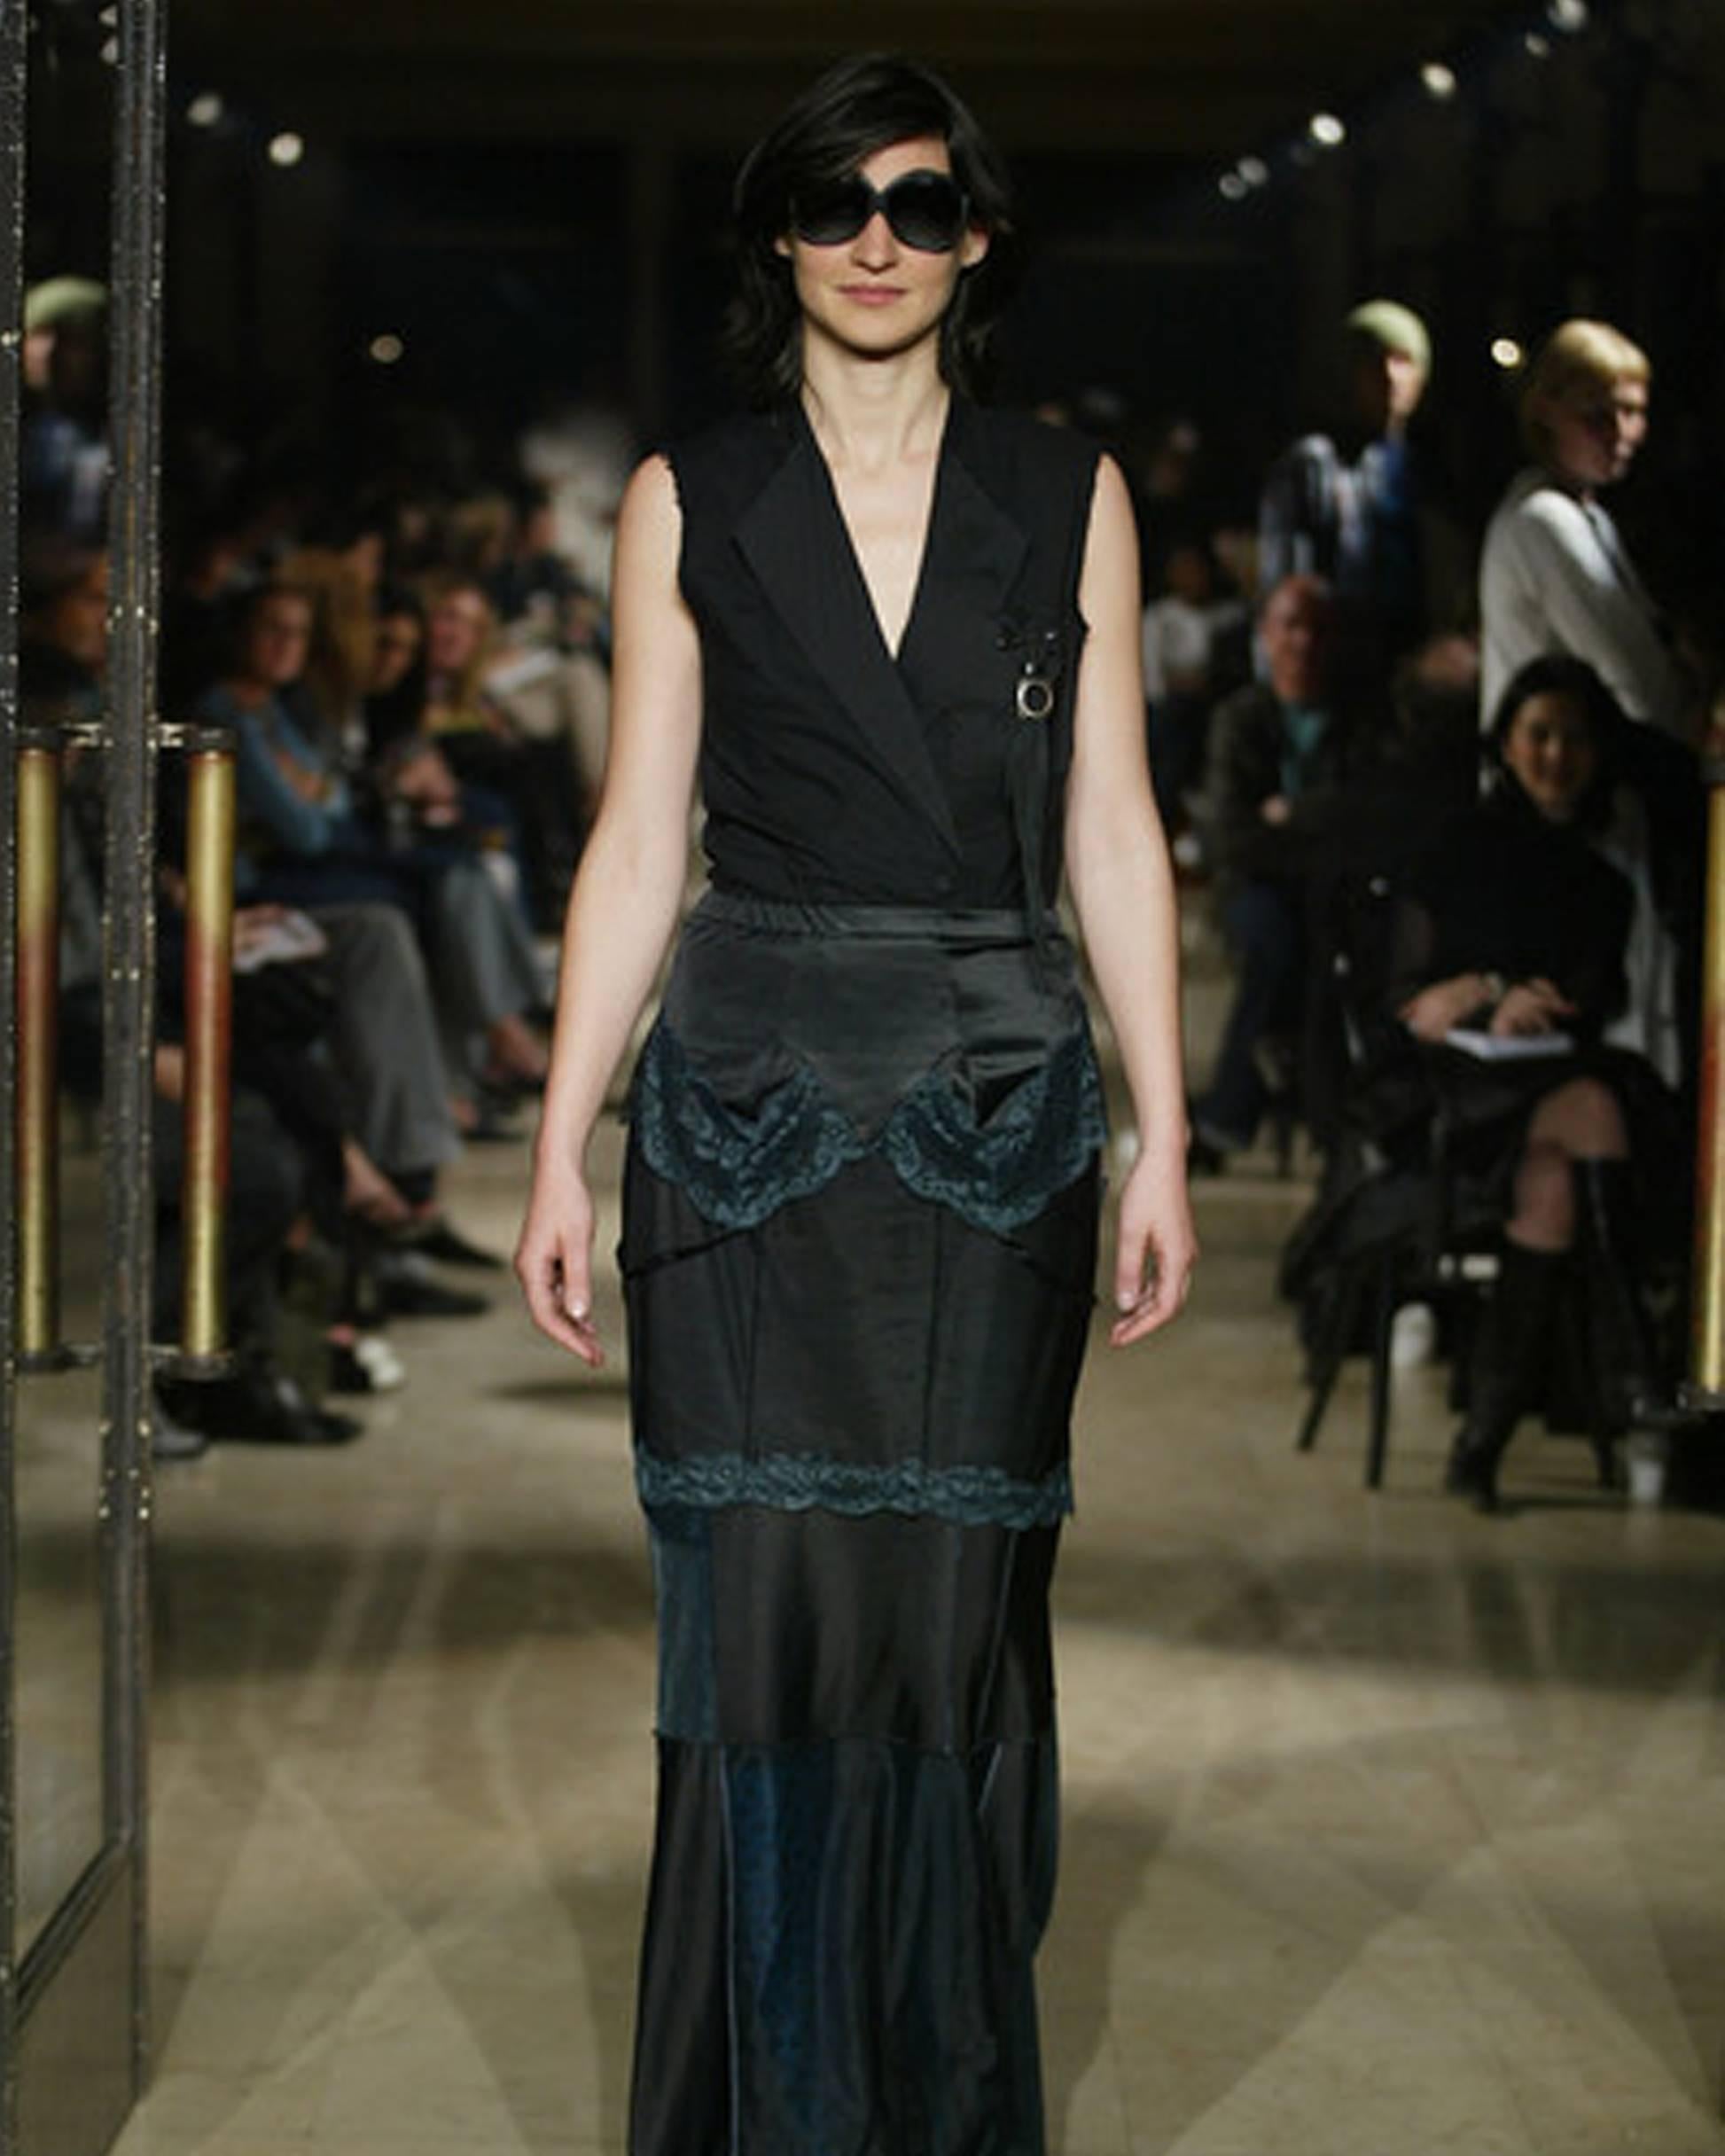 Introducing a unique Maison Martin Margiela Spring-Summer 2003 black polyester artisanal lingerie dress, thoughtfully reconstructed into a versatile skirt. This reconstructed piece captures the brand's artistic approach to fashion and reimagining